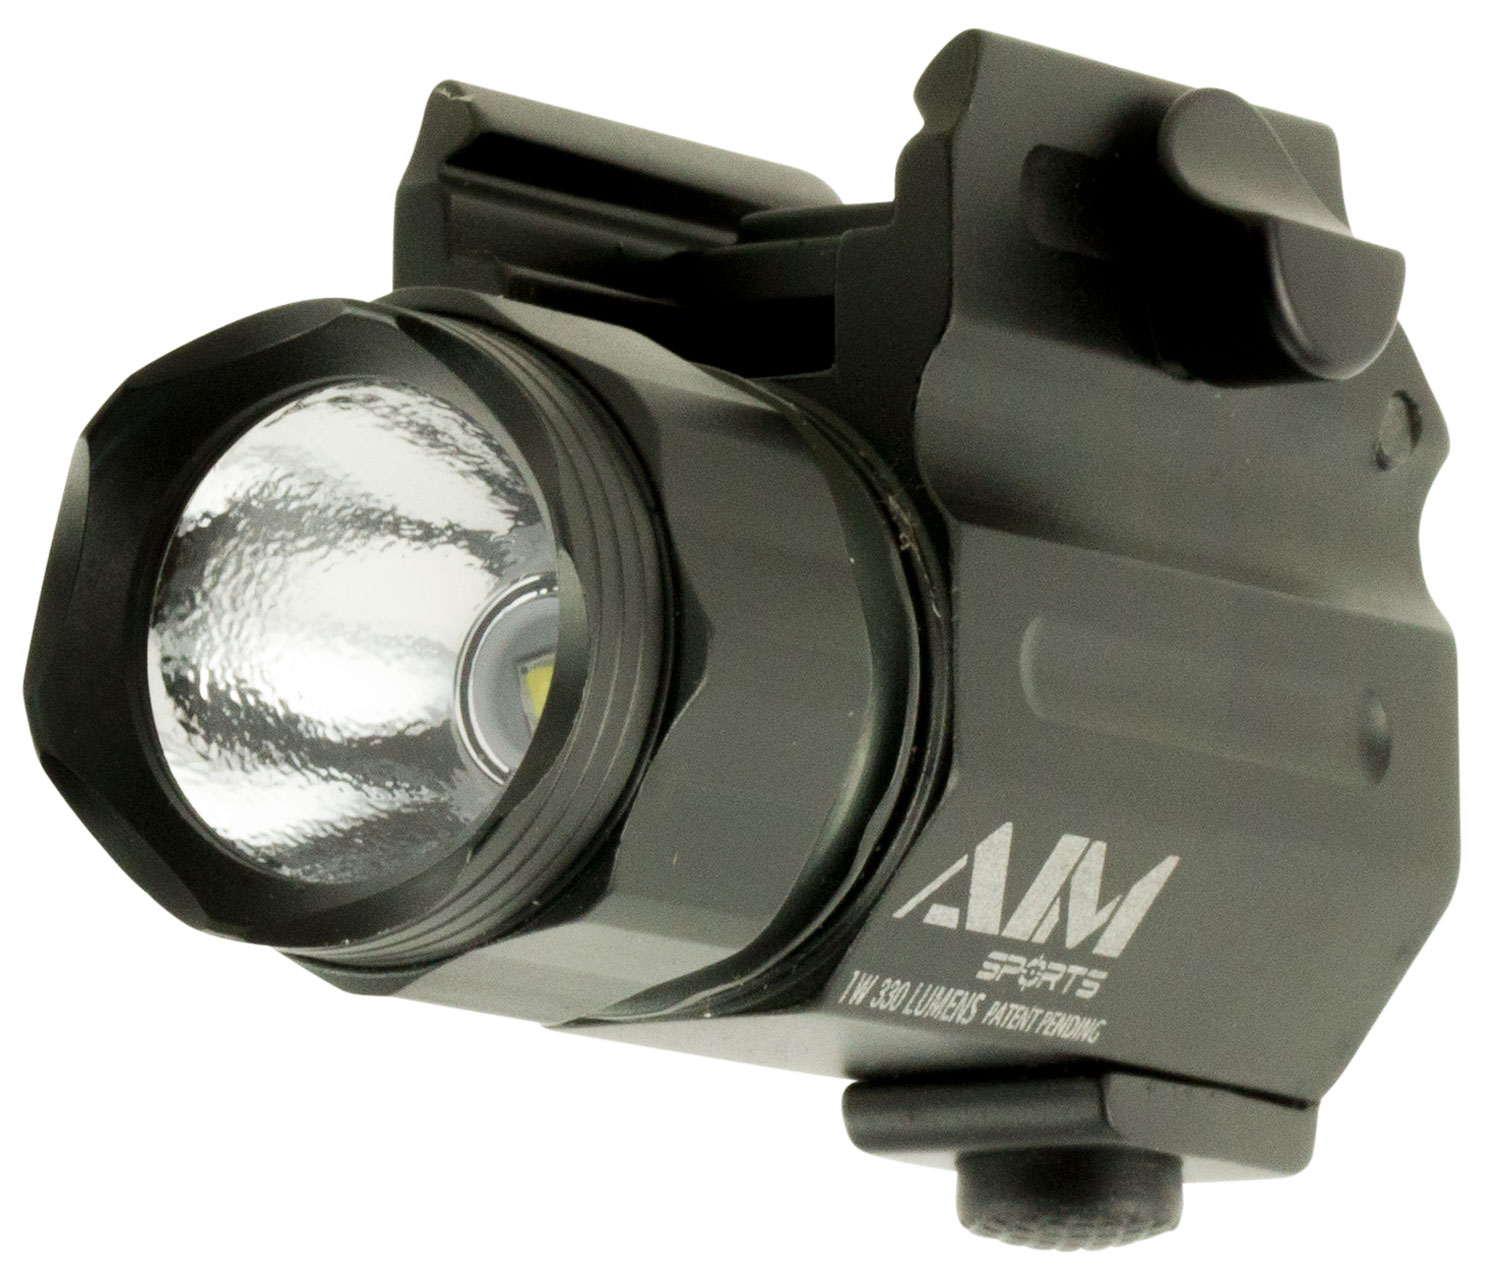 Aim Sports FQ330C Compact Weapon For Compact Pistol 330 Lumens Output White/Red/Green/Blue Cree LED Light Weaver Quick Release Mount Black Anodized Aluminum